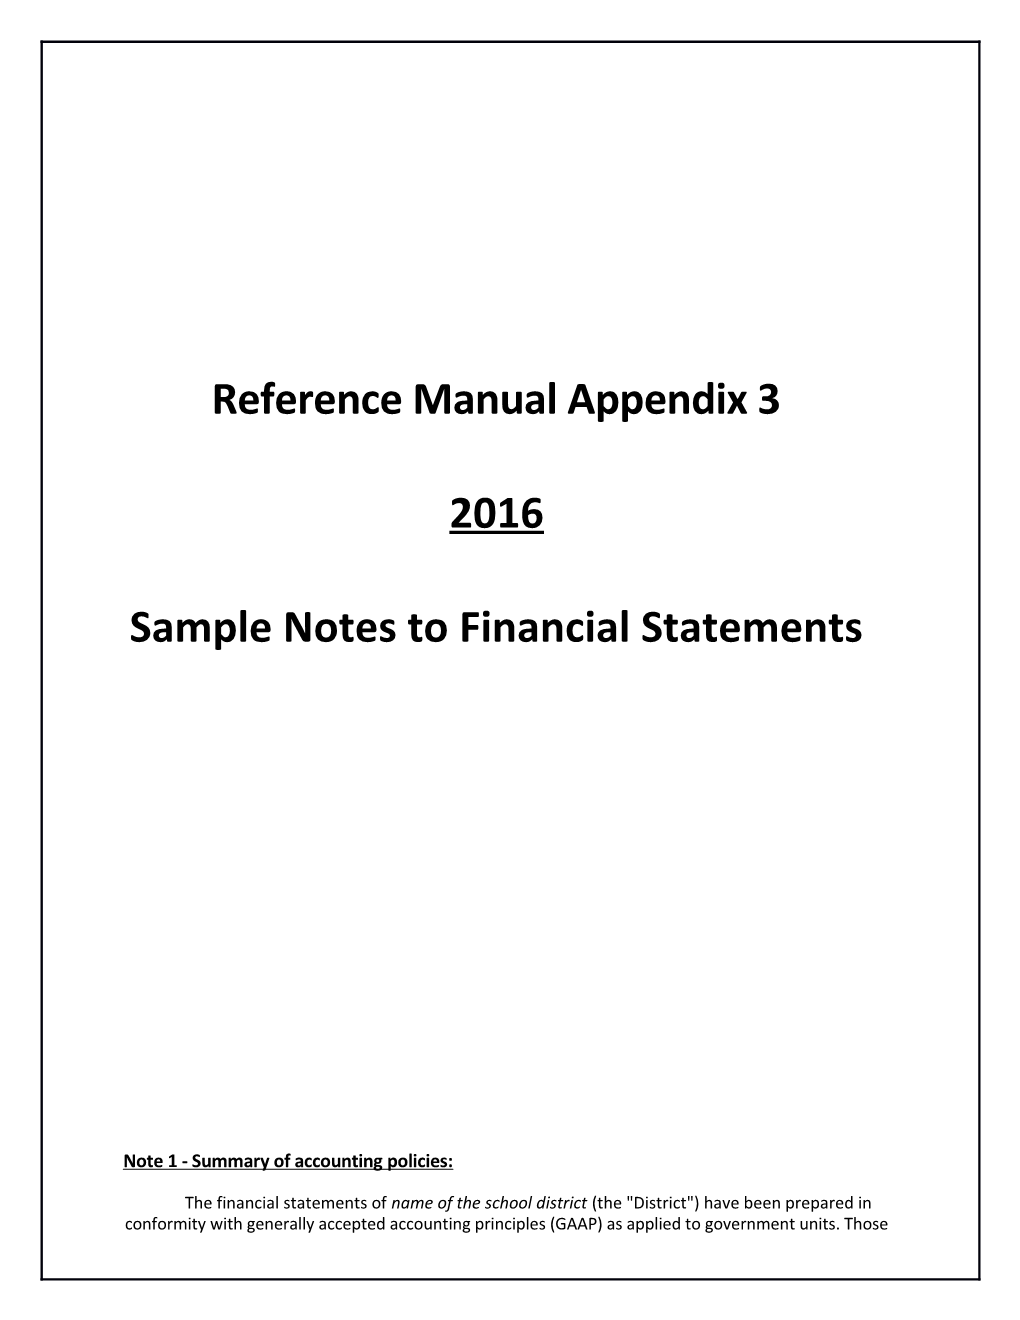 Sample Notes to Financial Statements